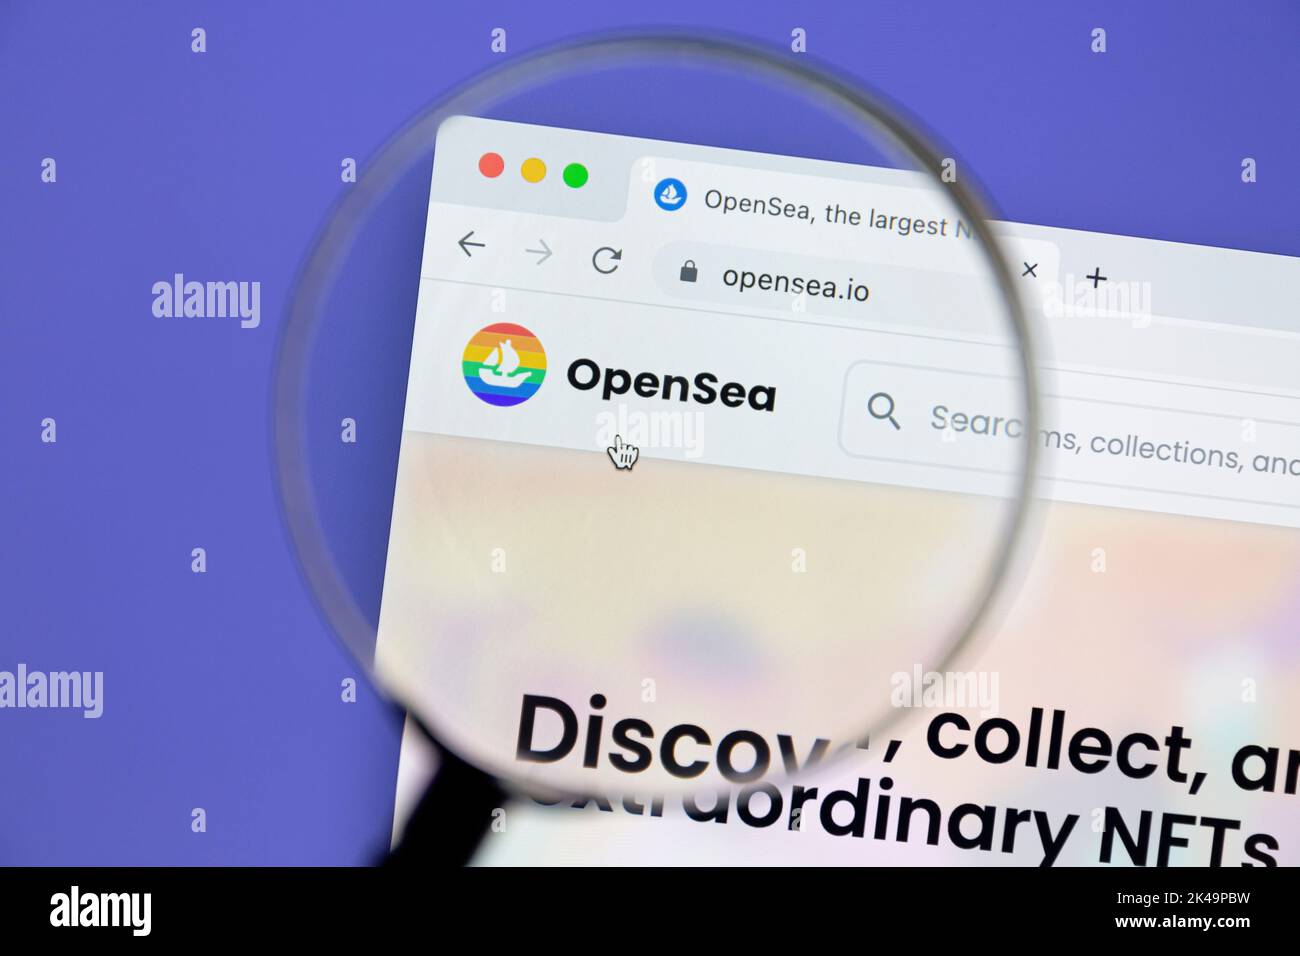 Ostersund, Sweden - July 1, 2020: OpenSea website under a magnifying glass. OpenSea is an American online non-fungible token (NFT) marketplace. Stock Photo